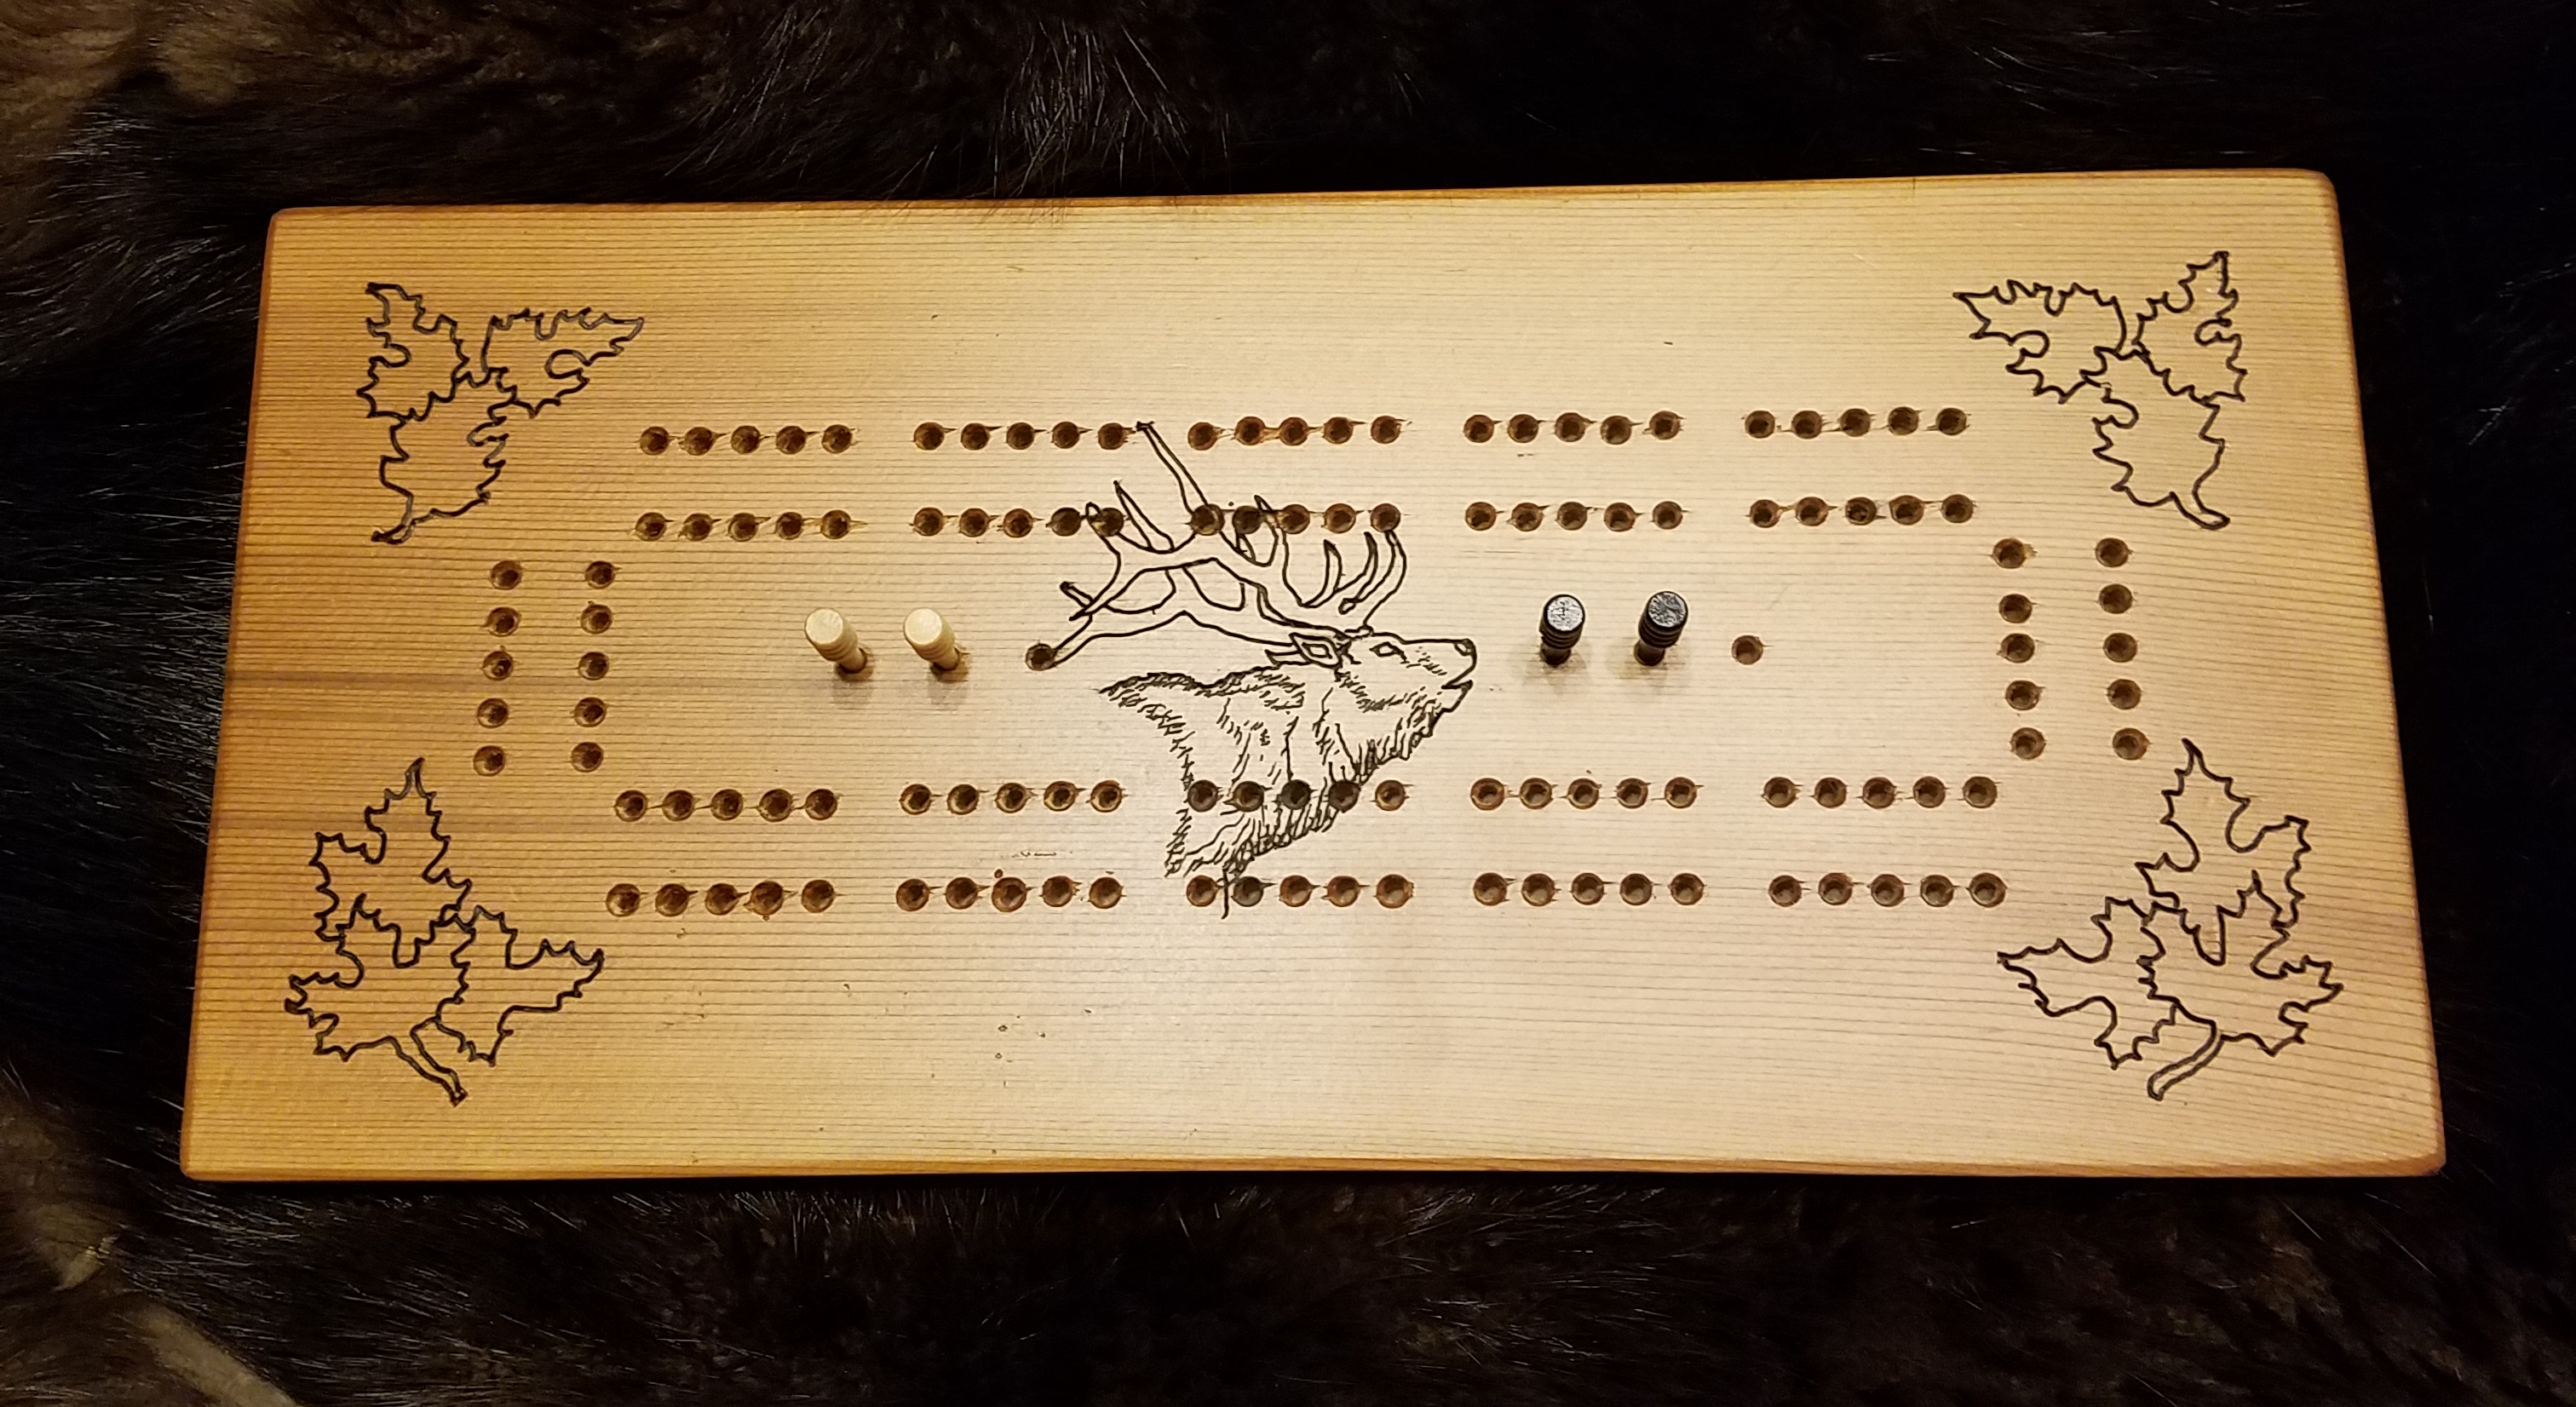 red cedar engraved elk cribbage board, not a cheap laser imitation ....  $75.00    Sold... I can always make another